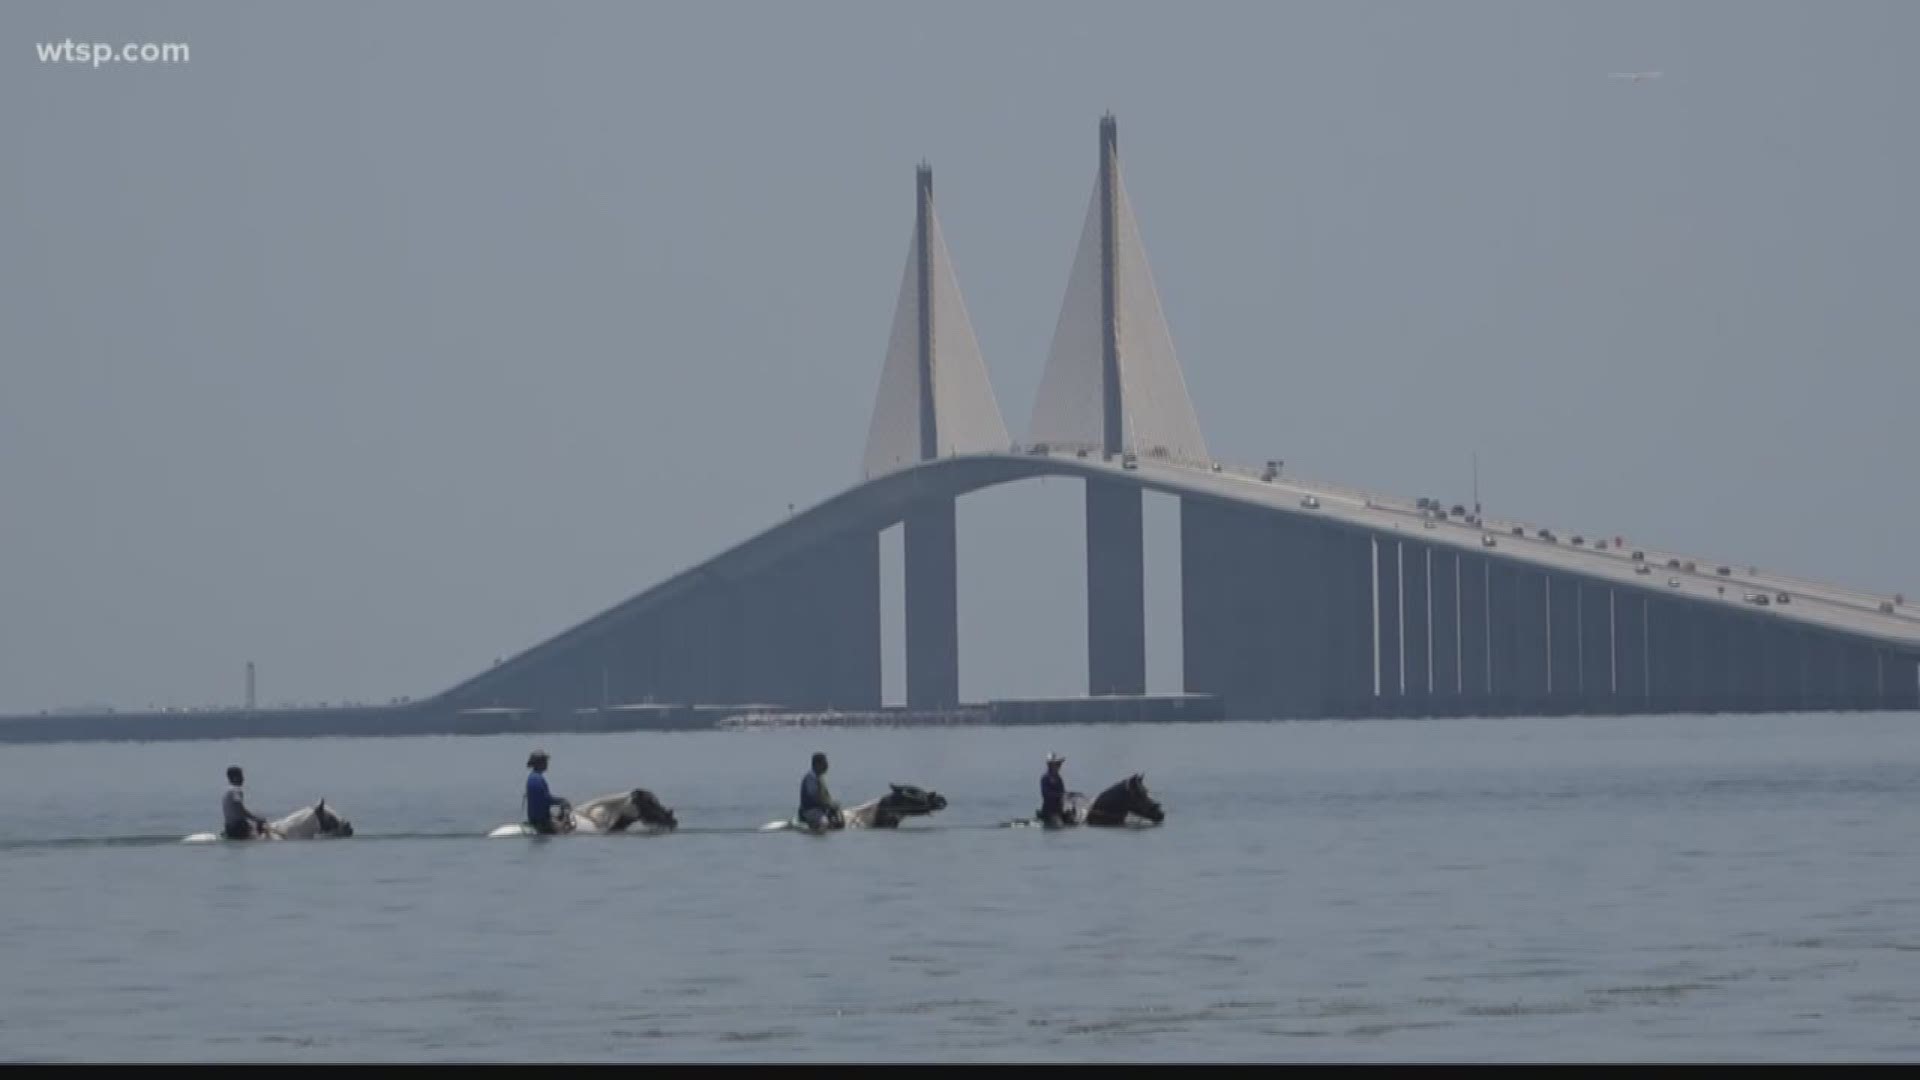 County commissioners passed an ordinance Tuesday night to protect the waters of Tampa Bay by banning horseback rides in the water